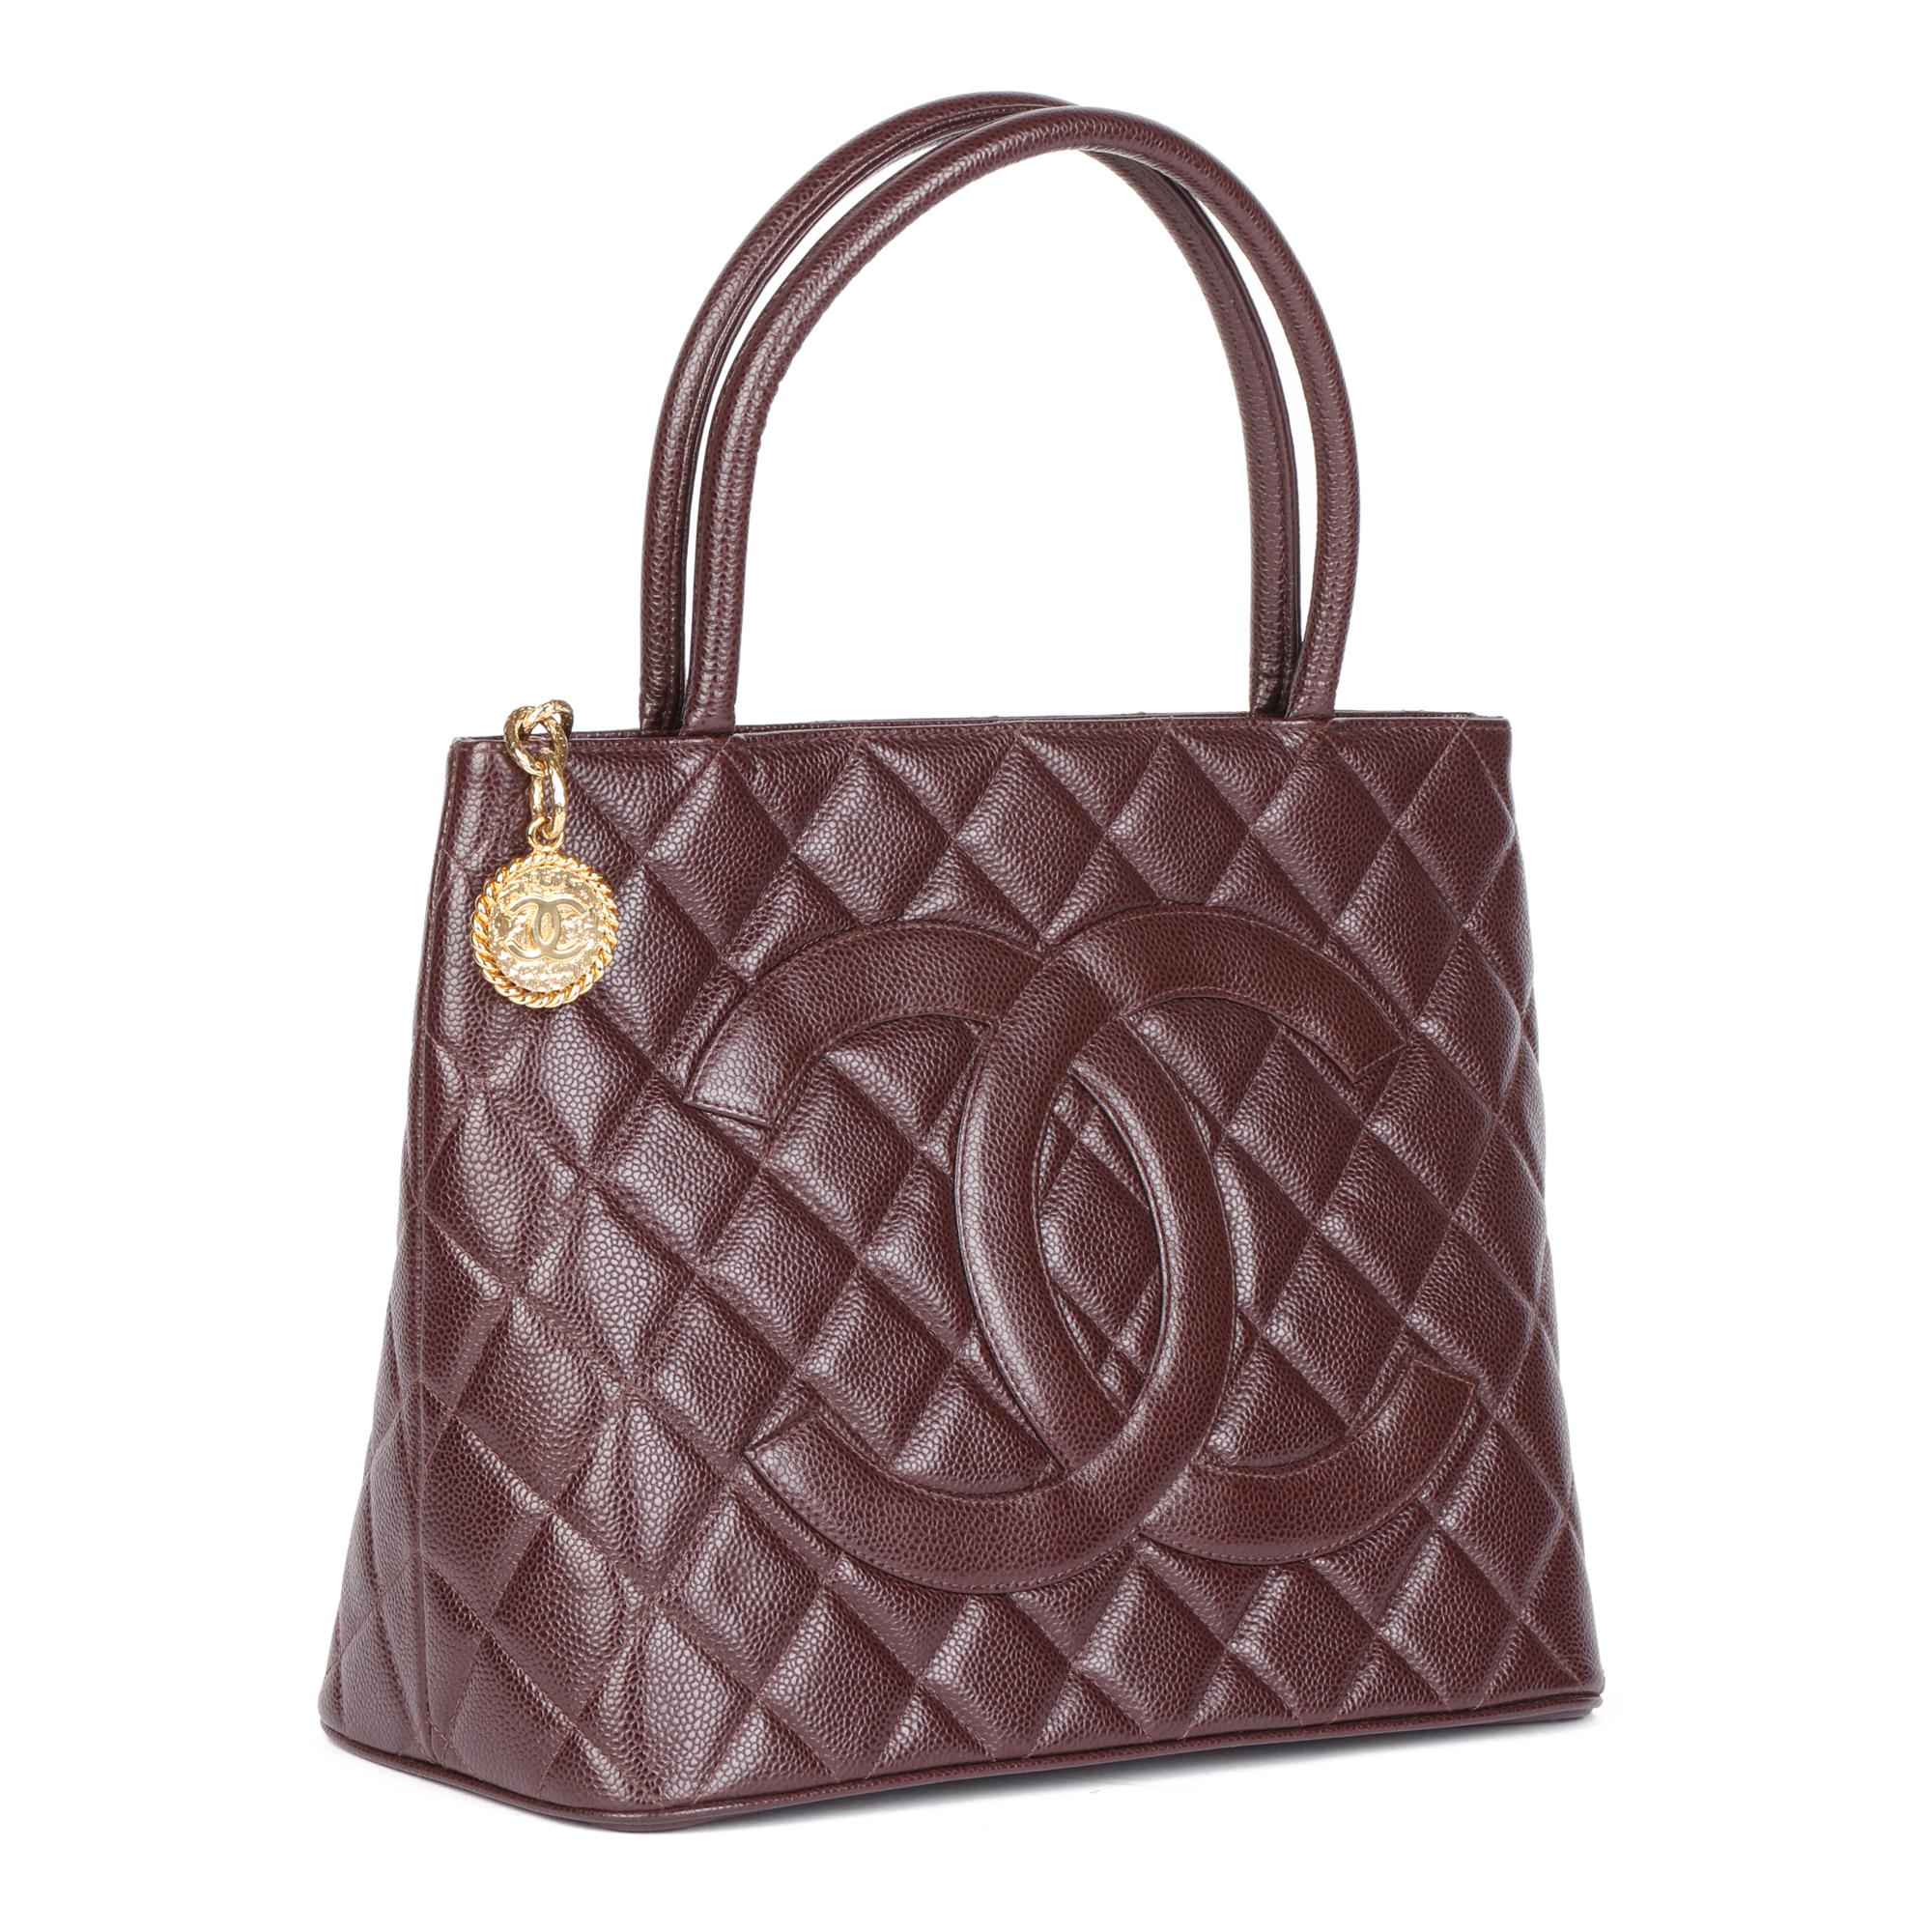 CHANEL
Chocolate Brown Quilted Caviar Leather Vintage Medallion Tote

Xupes Reference: HB4897
Serial Number: 7790000
Age (Circa): 2002
Accompanied By: Authenticity Card
Authenticity Details: Authenticity Card, Serial Sticker (Made in France)
Gender: